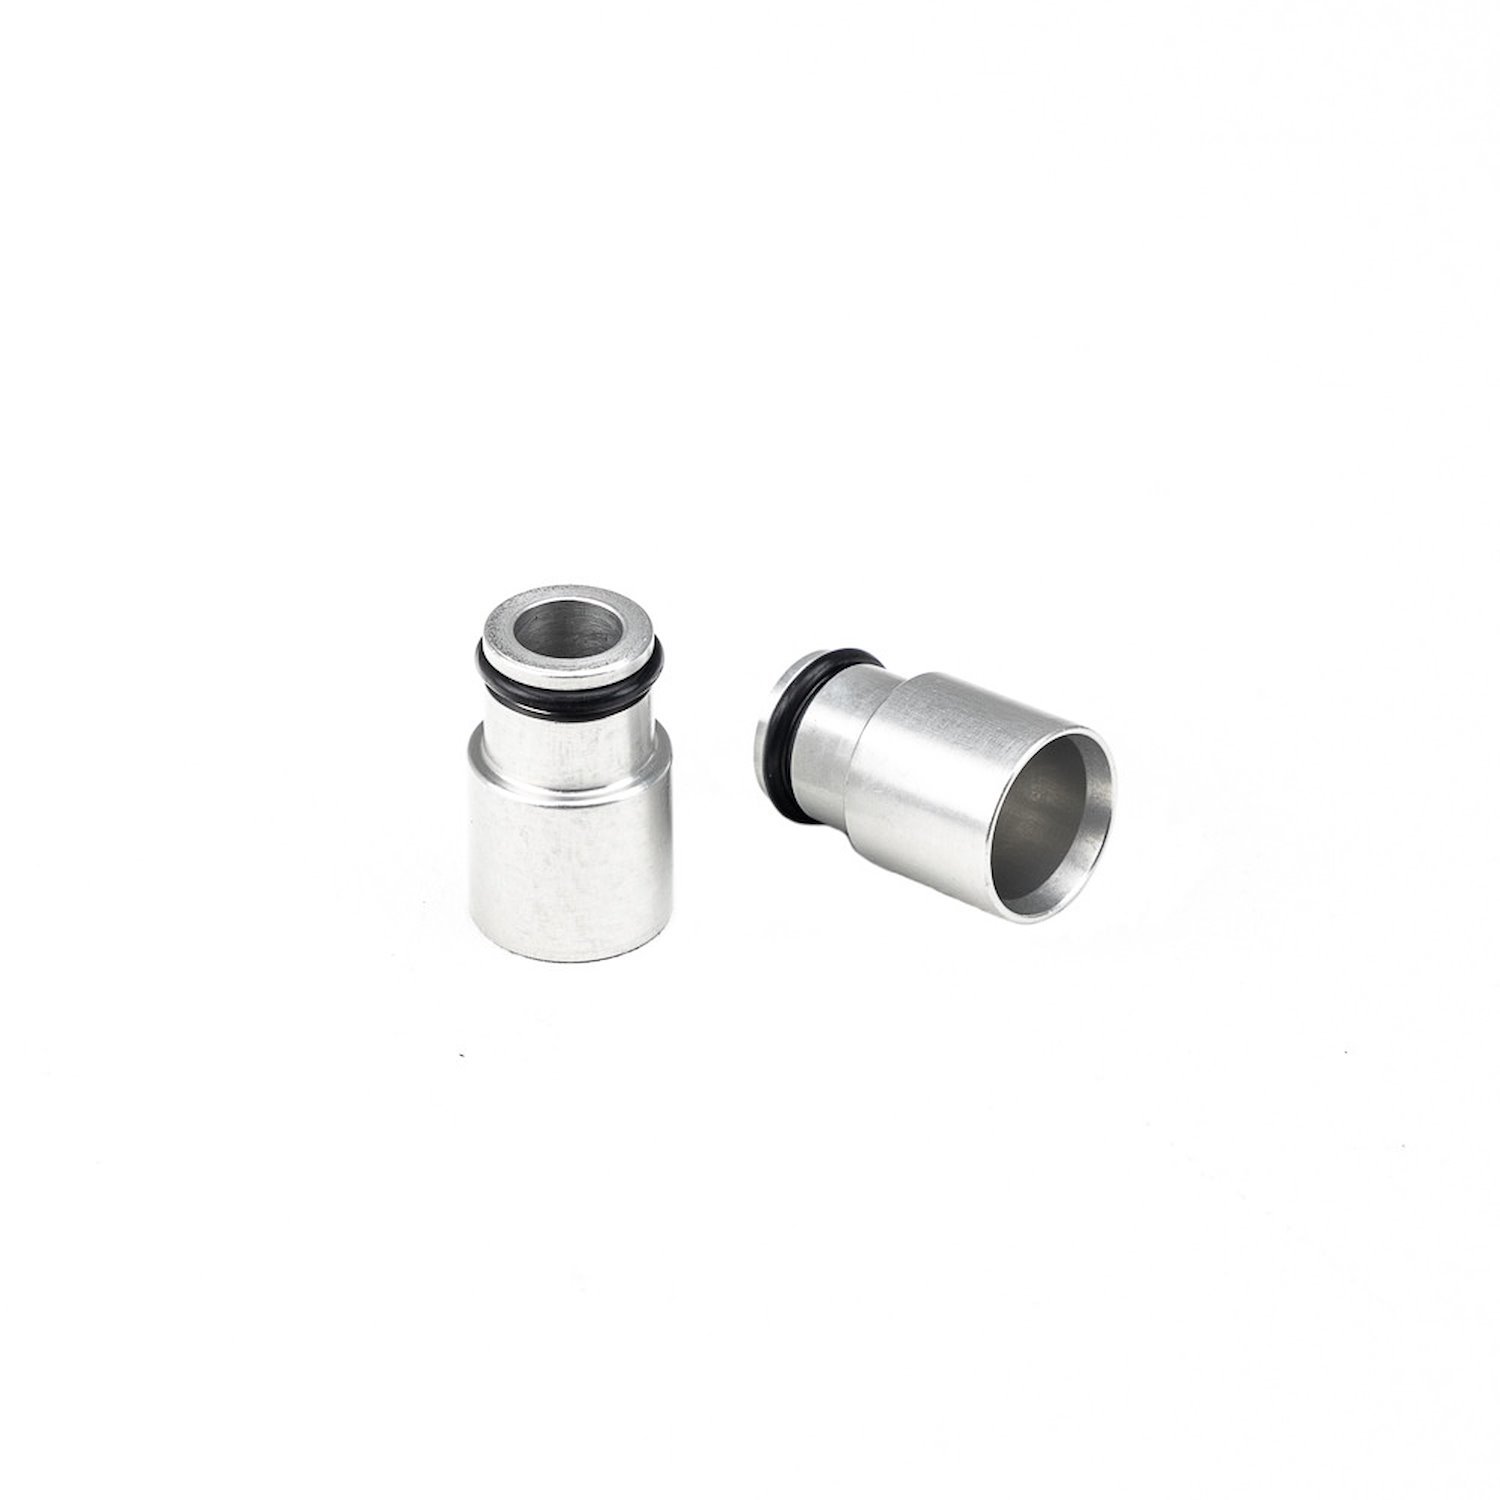 48.60.14B.V2 Fuel Injector Adaptor, +12 mm Clear Anodize Bottom Adapter, 14 mm Lower O-Ring